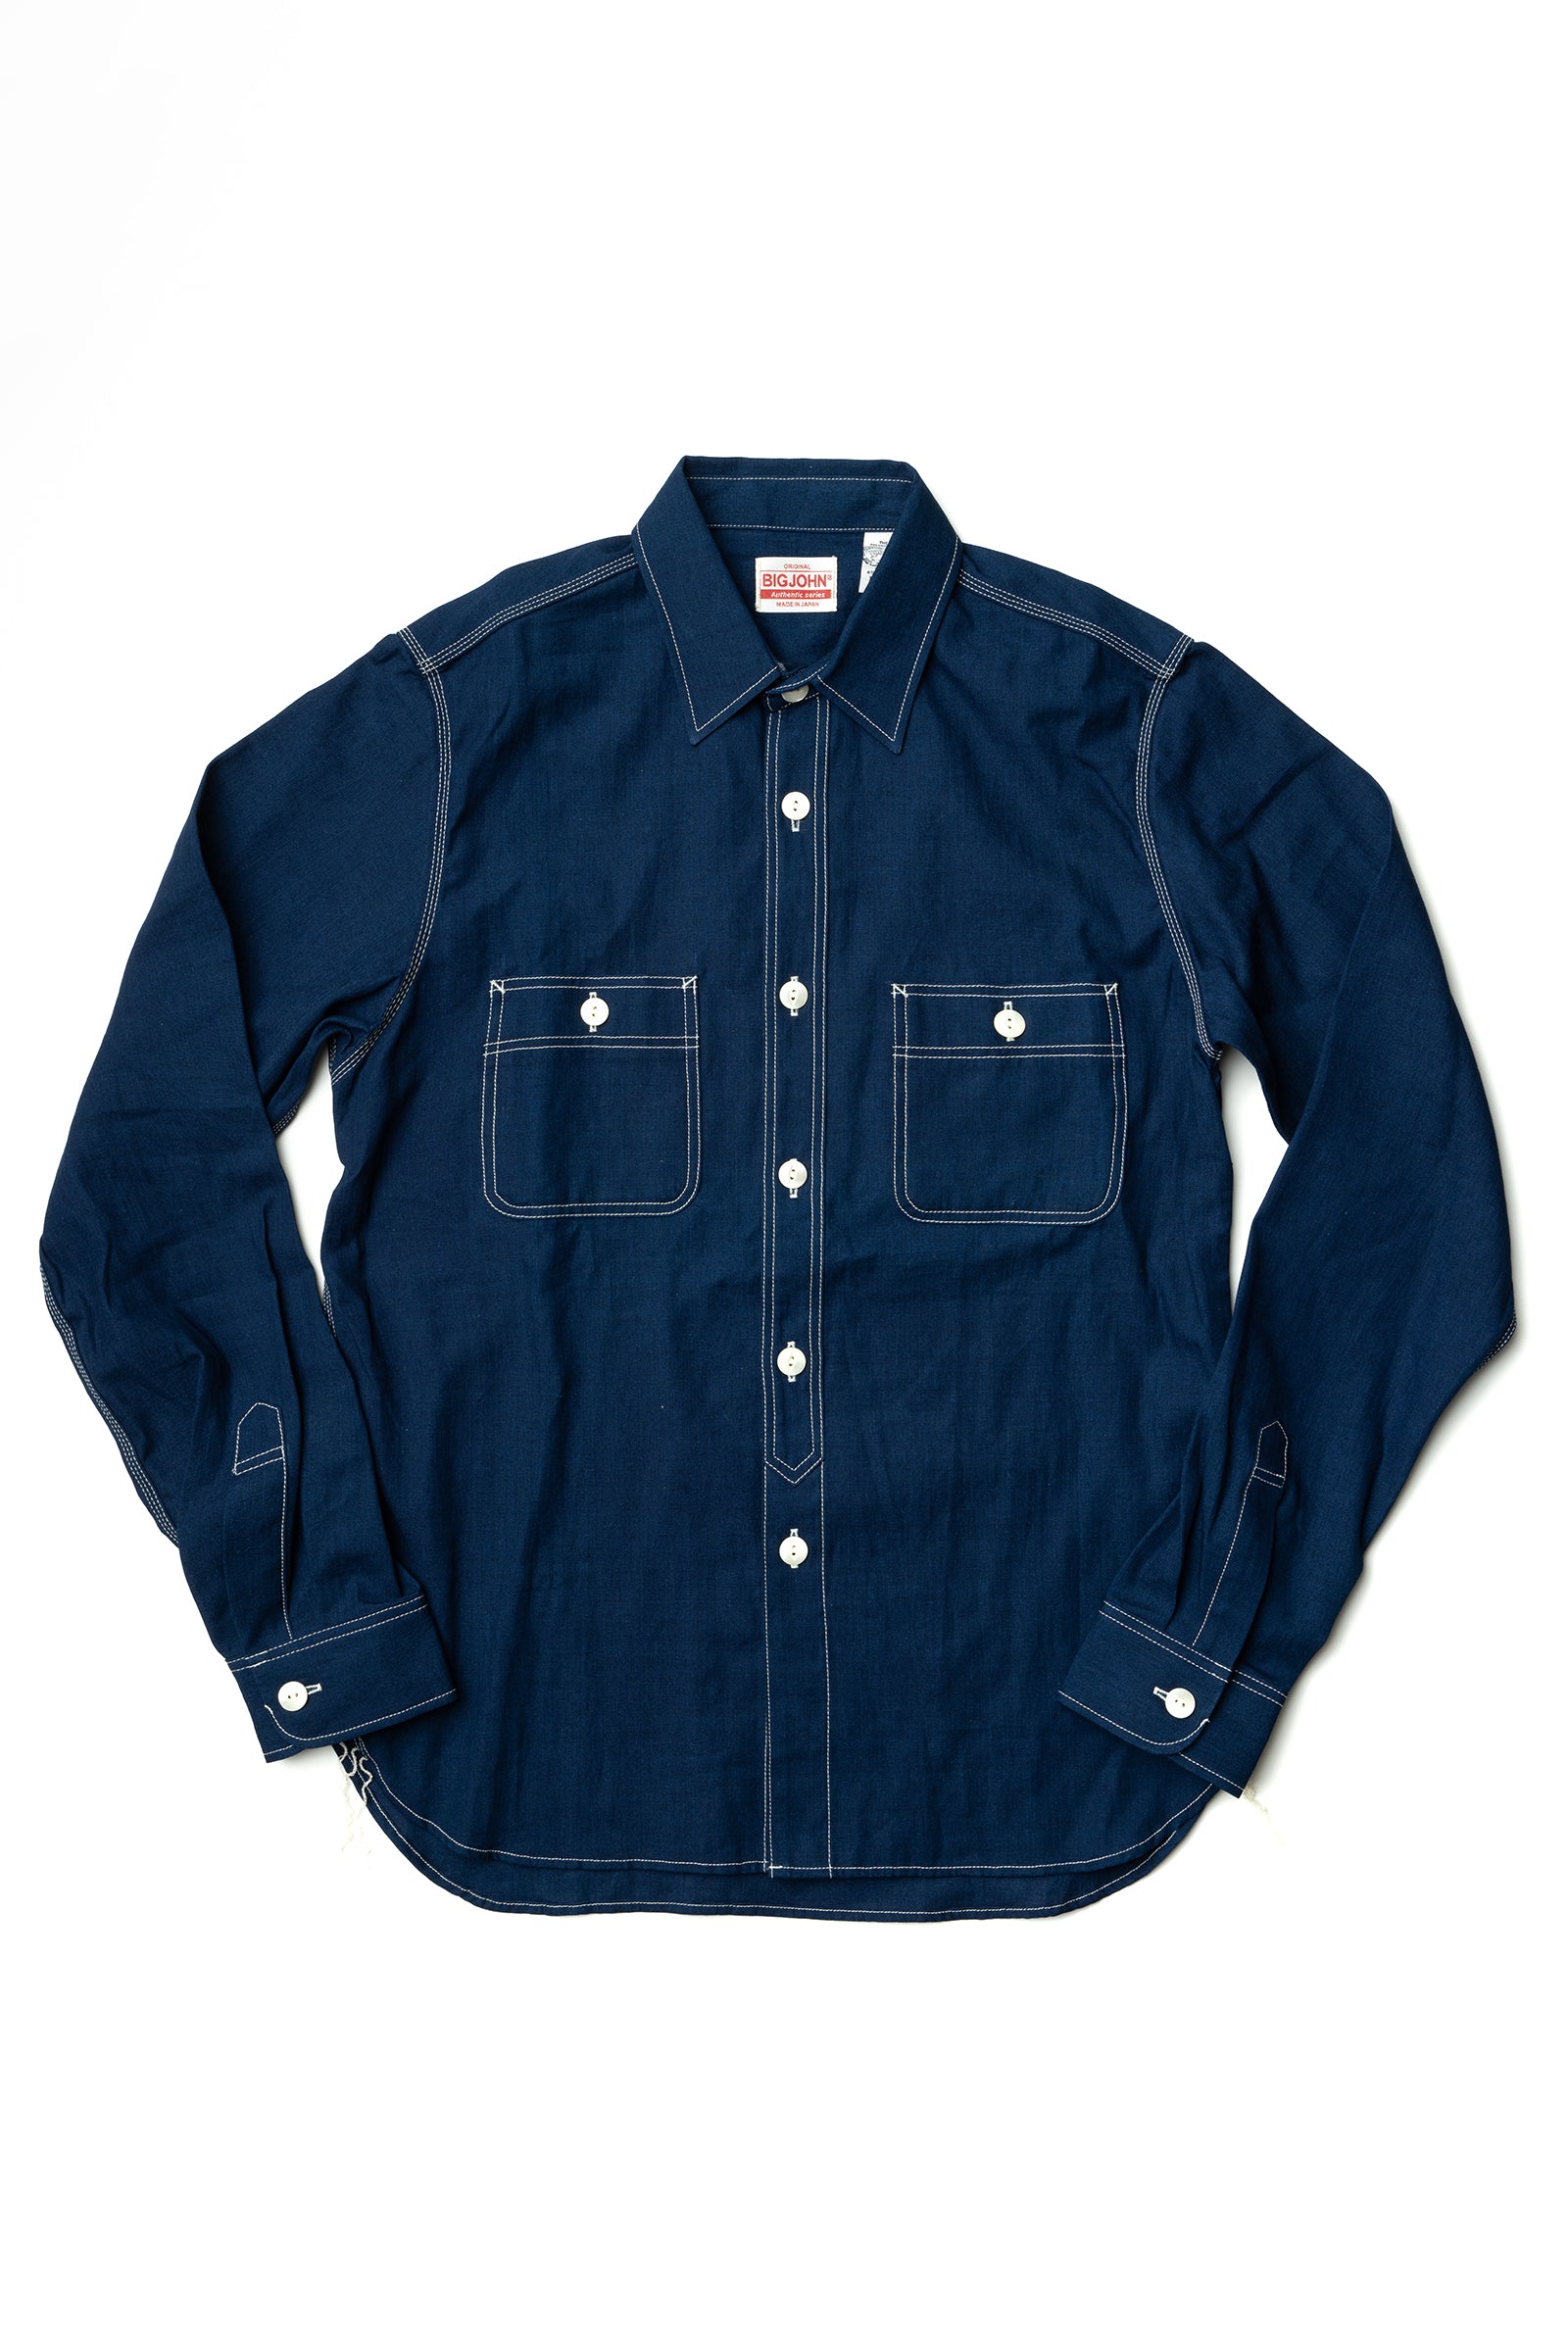 【REMI RELIEF/レミレリーフ】Chambray Shirt